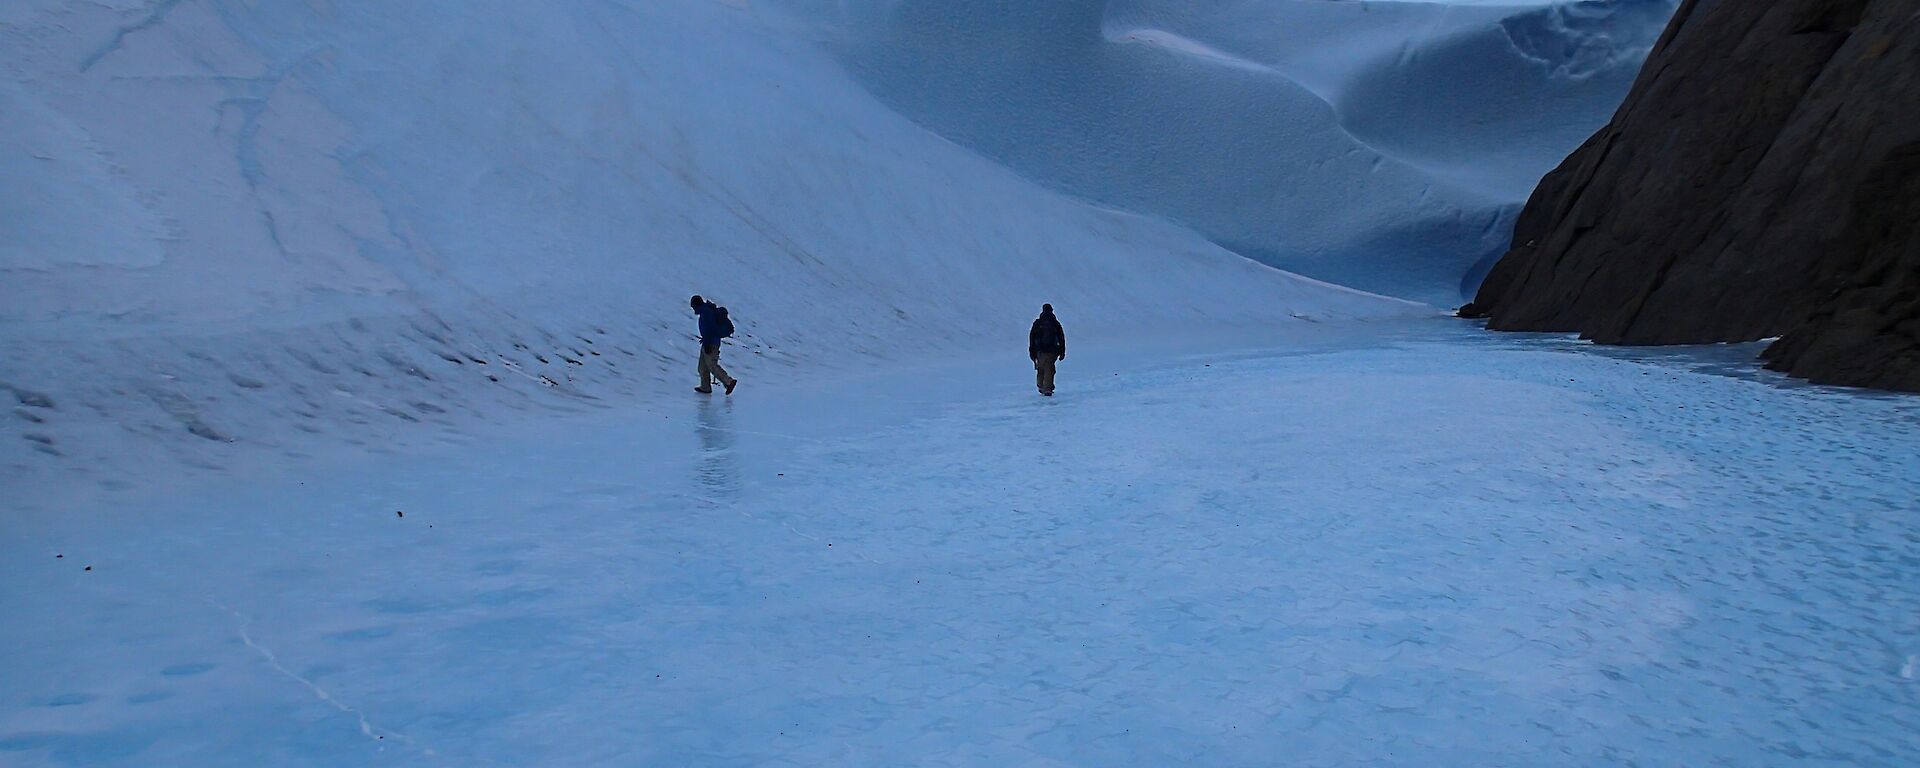 A large wave of ice at the bottom of a mountain with two expeditioners walking